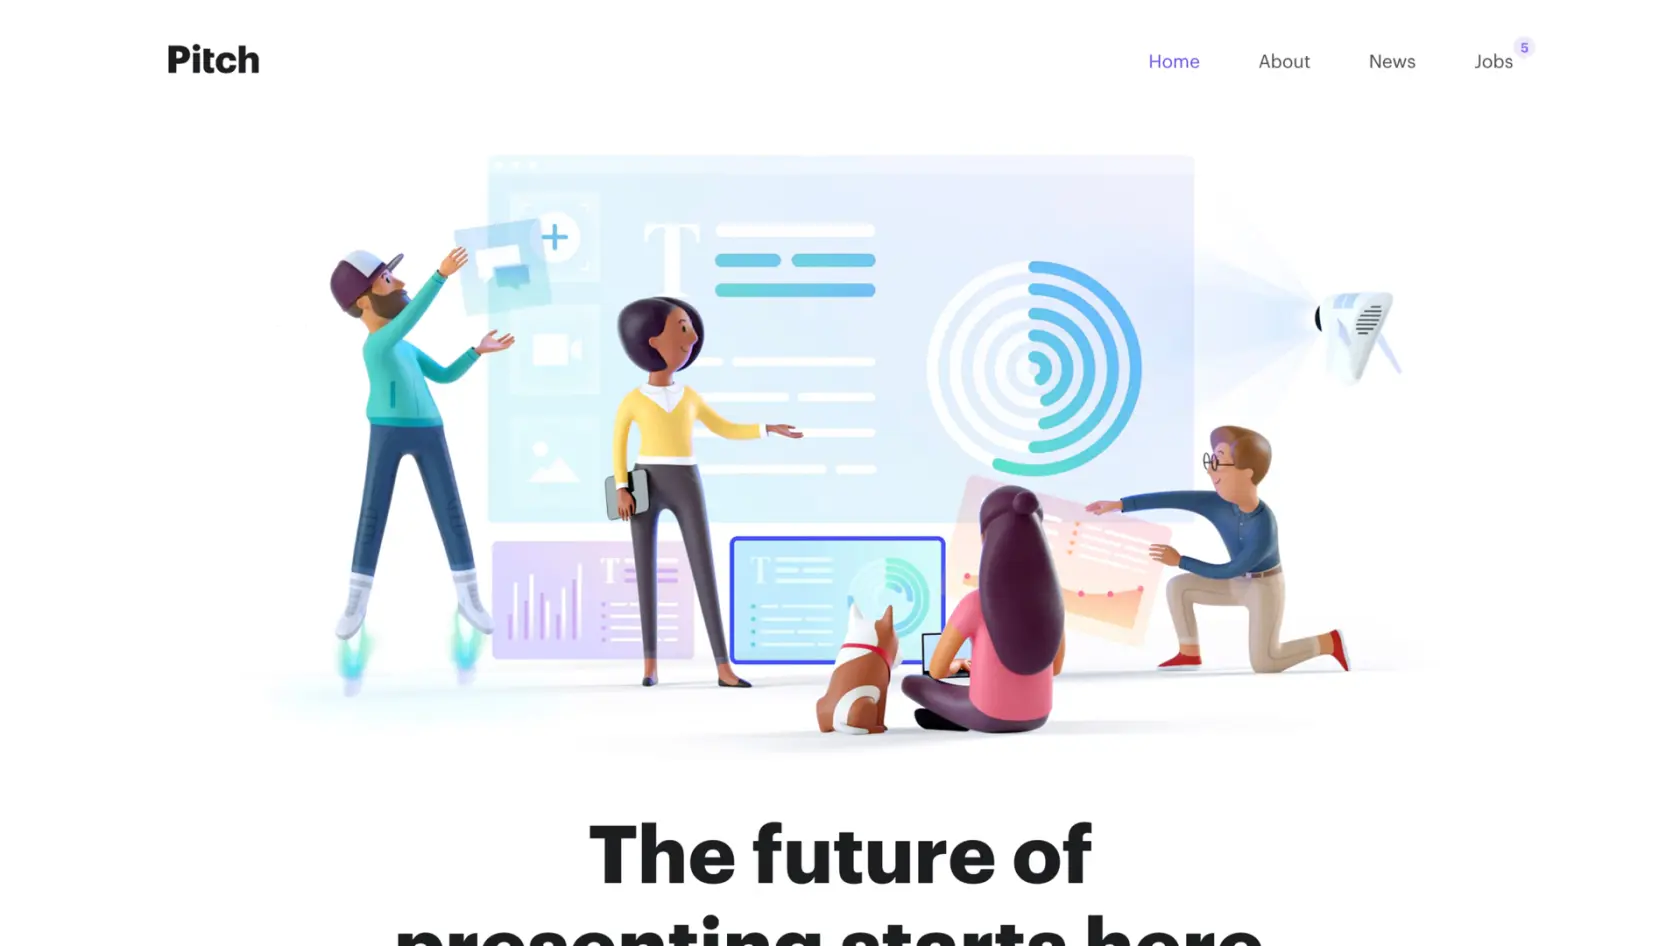 Illustration of four stylized characters collaborating with interactive digital elements, with text 'The future of presenting starts here' on a website header.